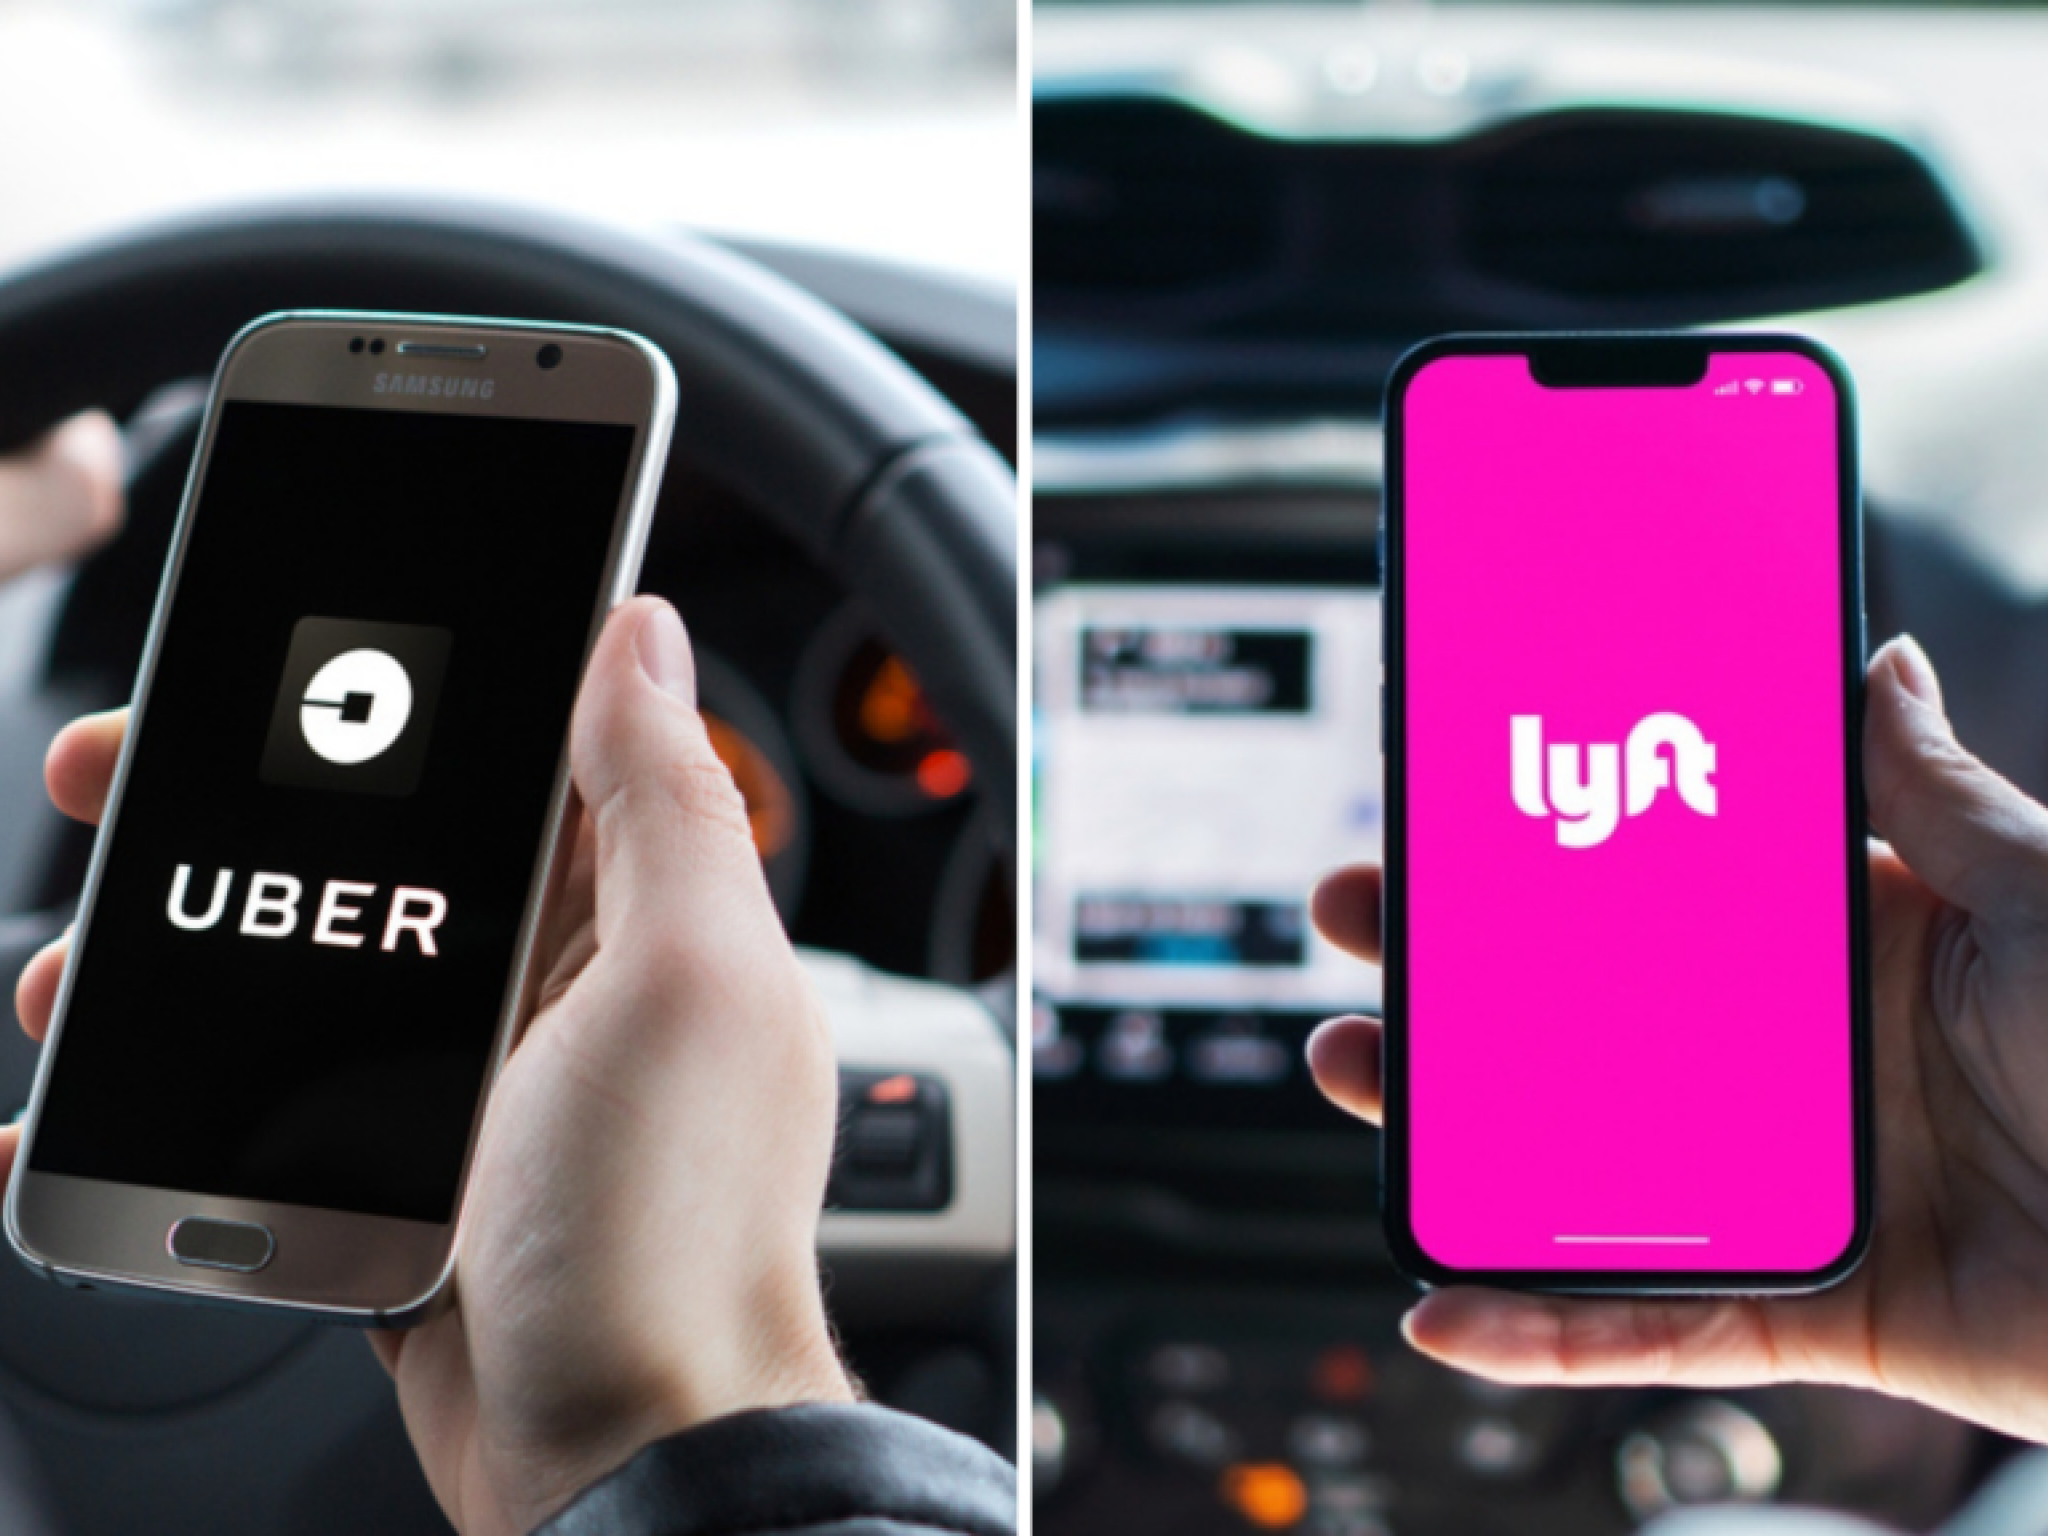  uber-and-lyft-agree-to-worker-benefits-settle-state-lawsuit 